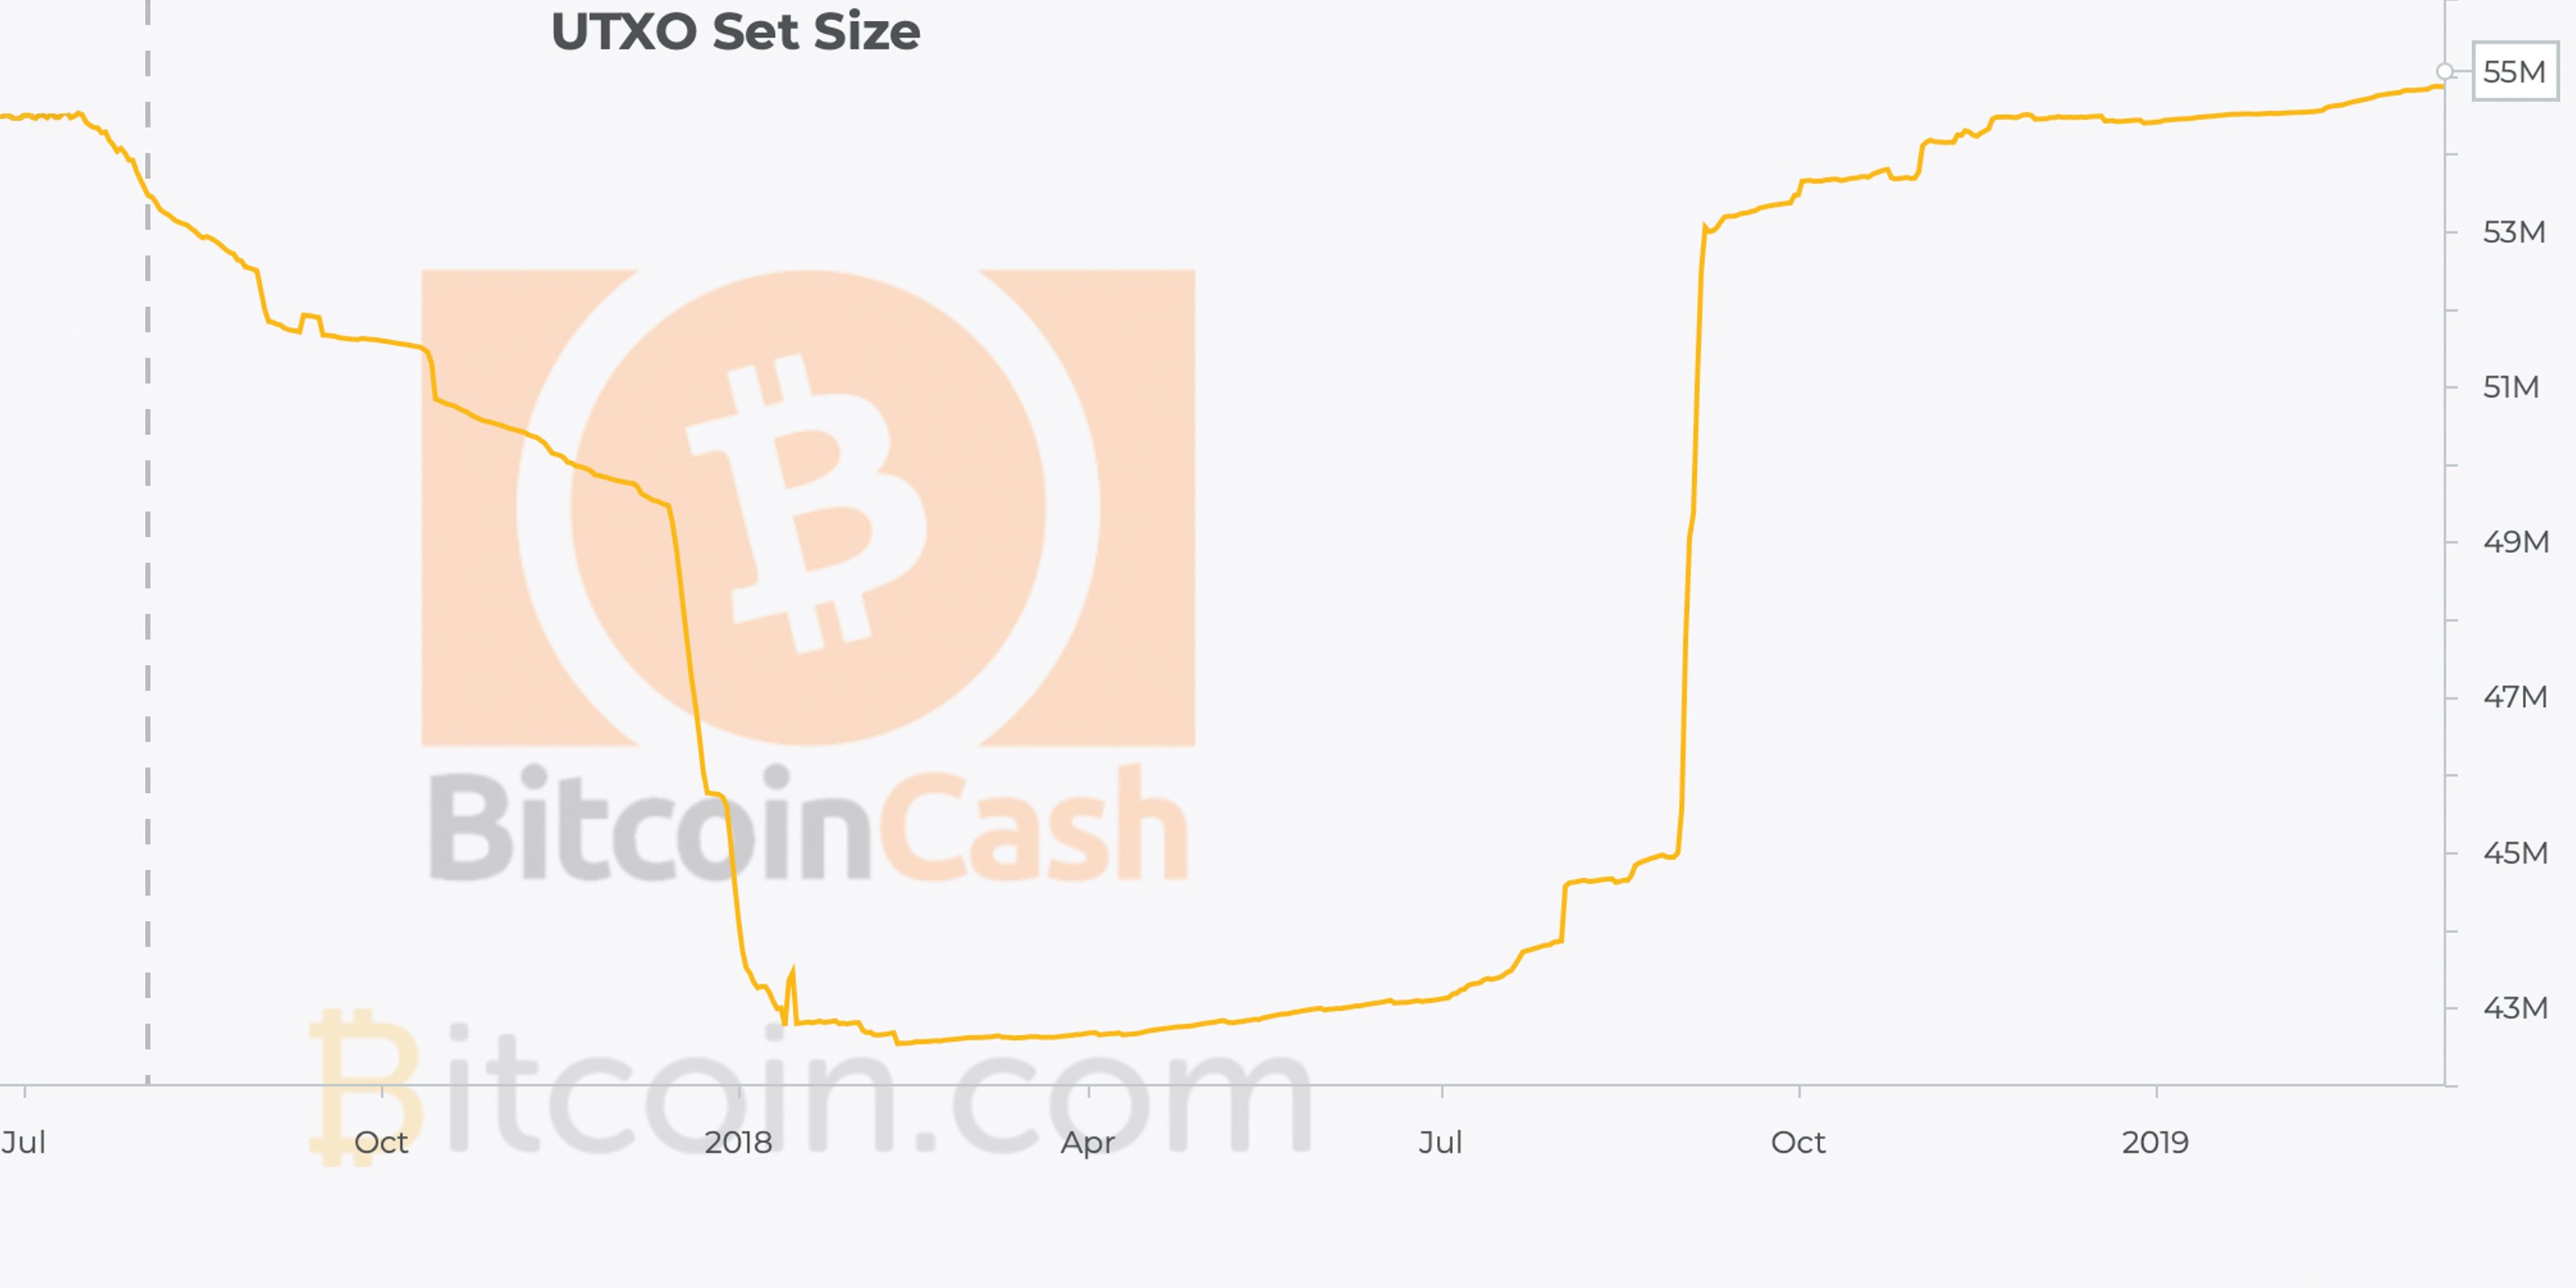 Bitcoin Cash Markets and Network Gather Strong Momentum in Q1